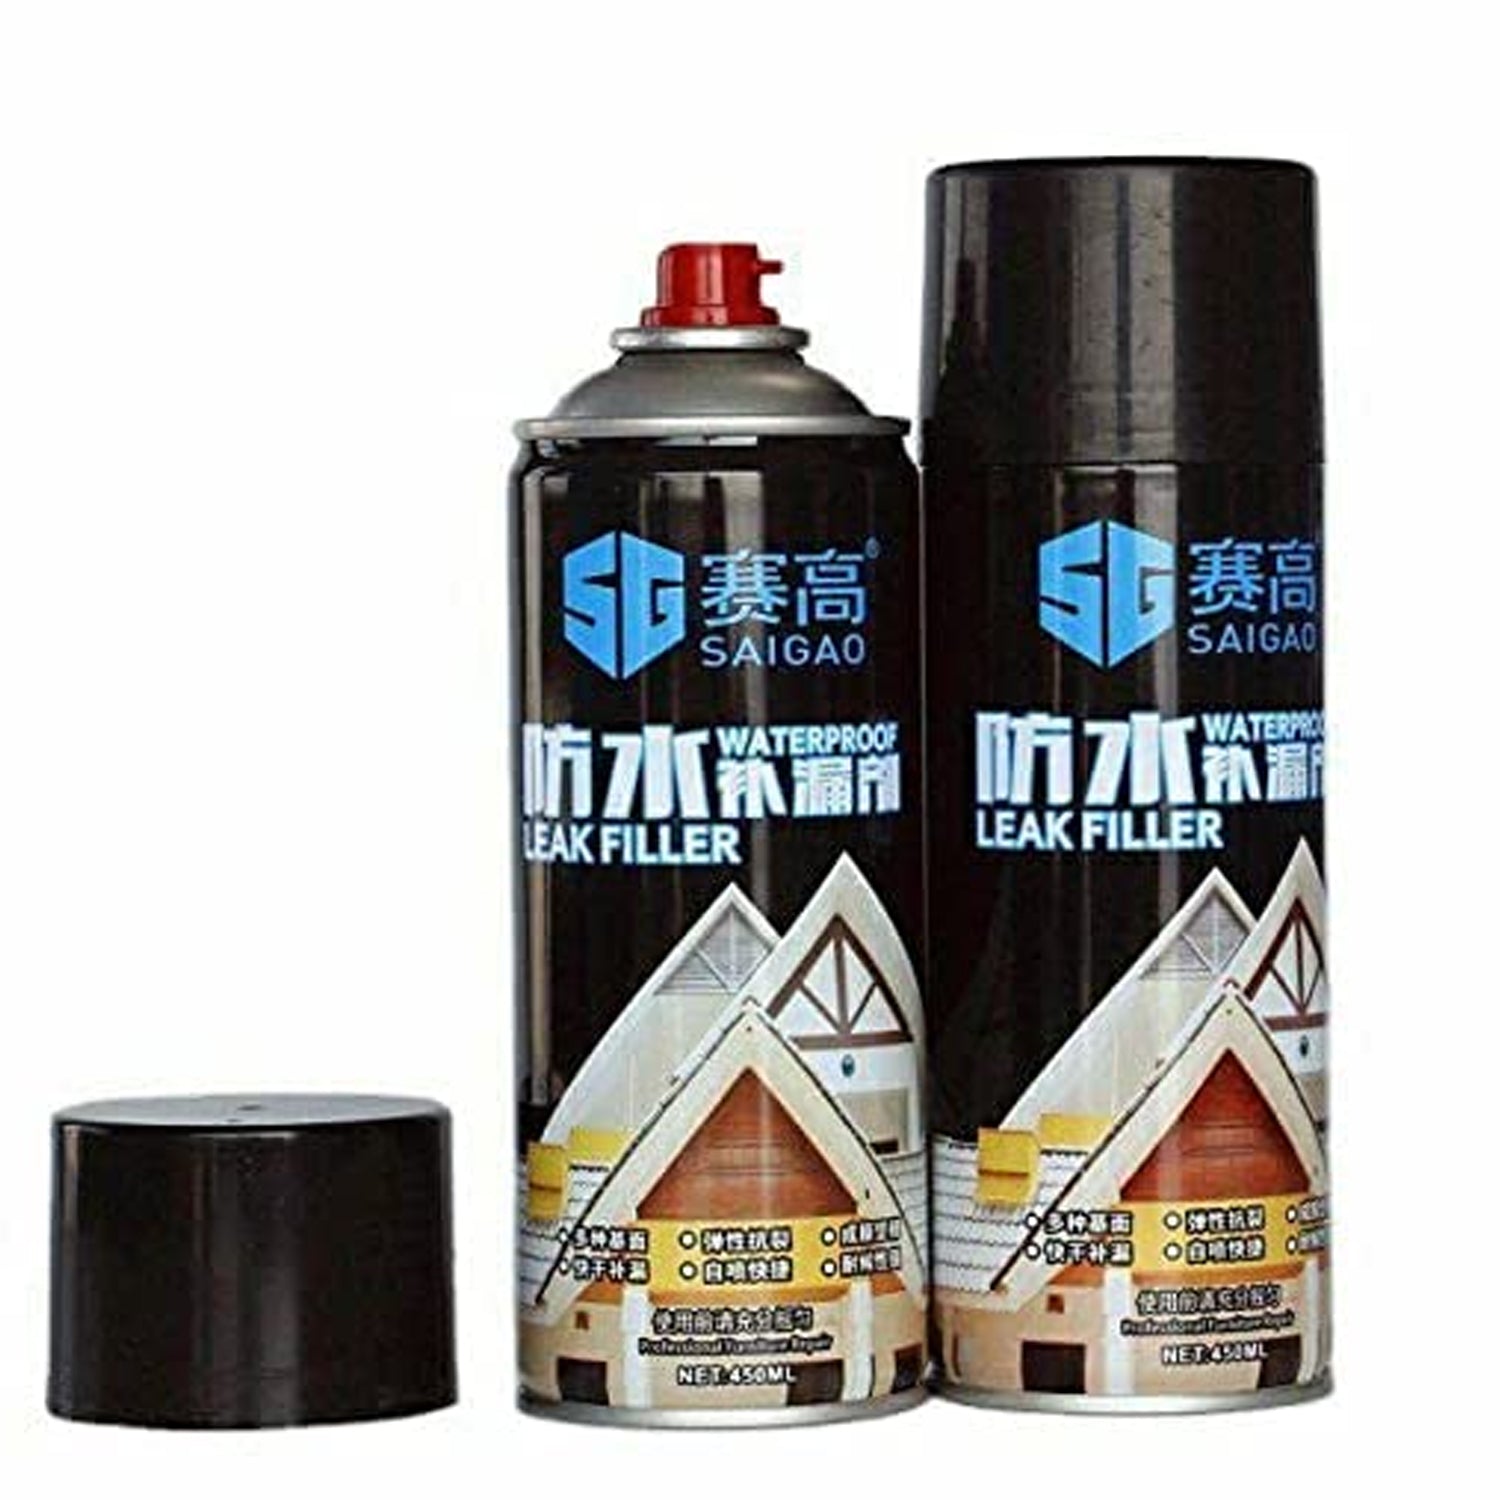 1332 Waterproof Leak Filler Spray Rubber Flexx Repair & Sealant - Point to Seal Cracks Holes Leaks Corrosion More for Indoor Or Outdoor Use Black Paint (450 Ml) - China, 0.388 kgs